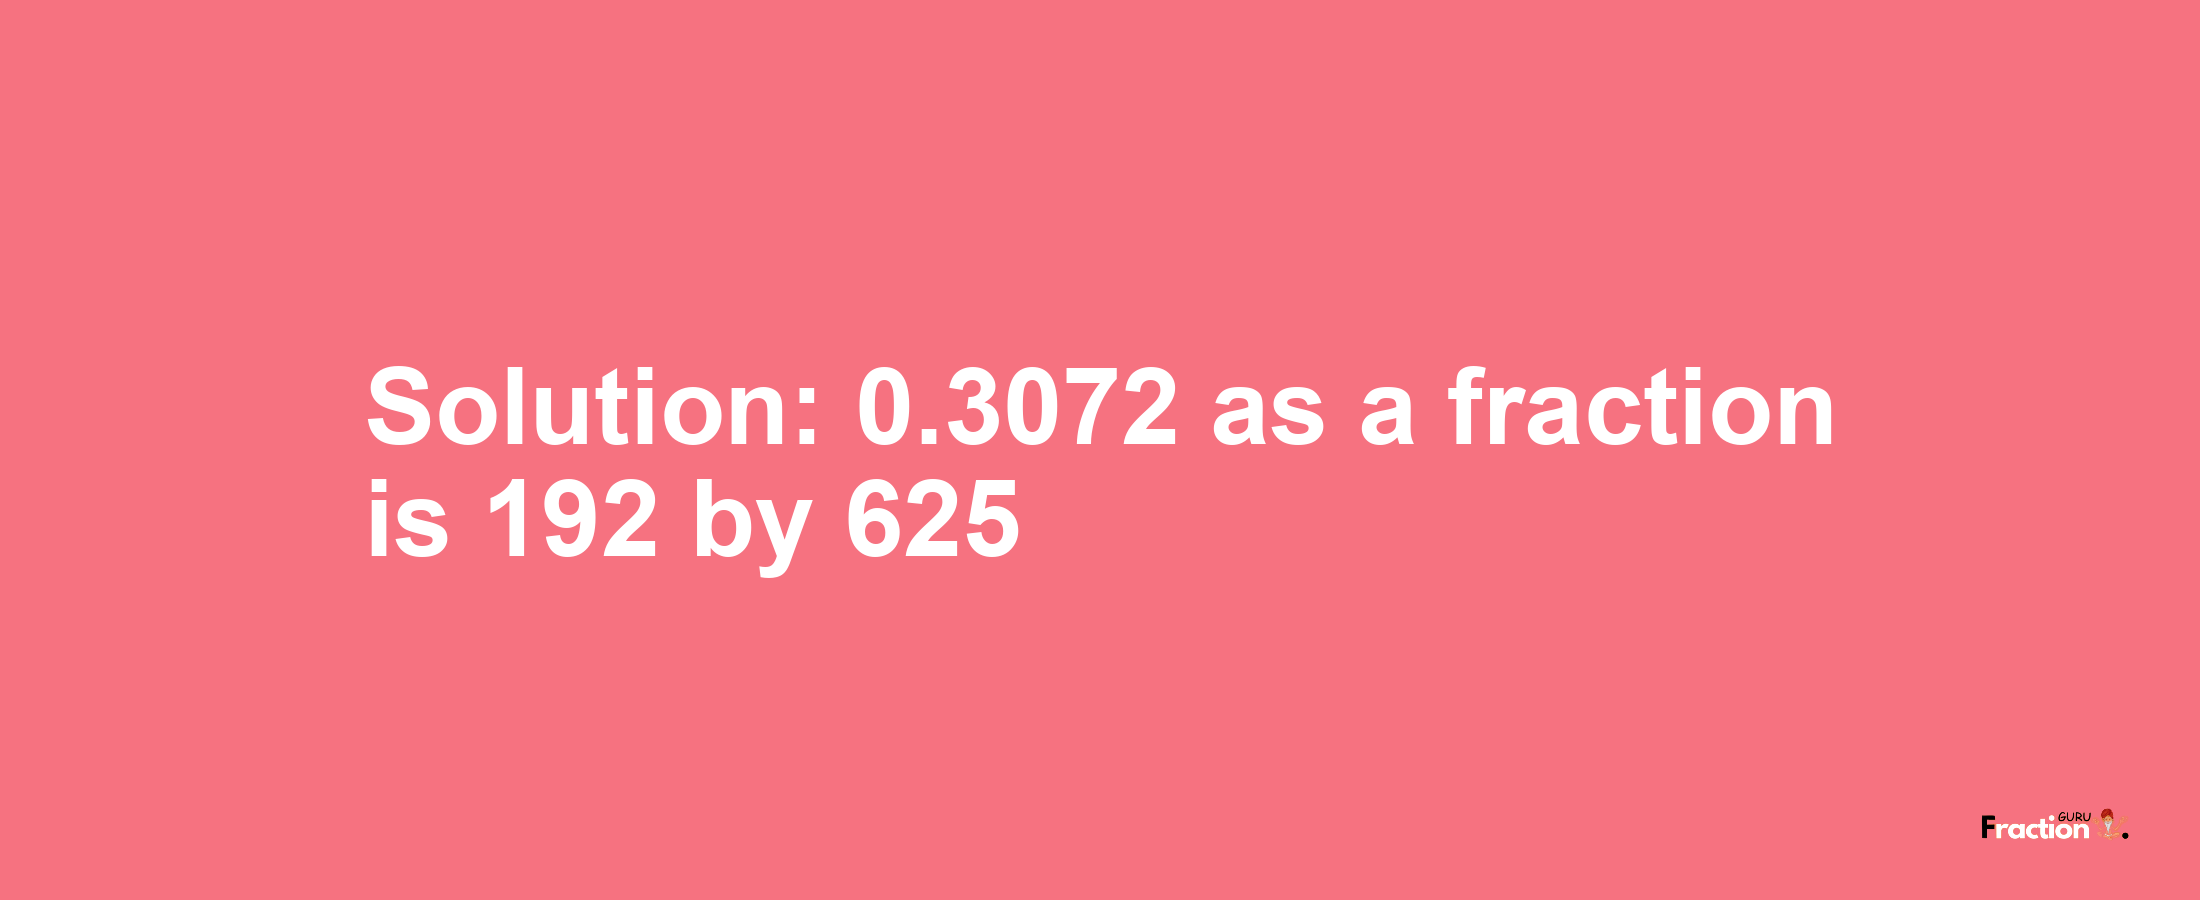 Solution:0.3072 as a fraction is 192/625